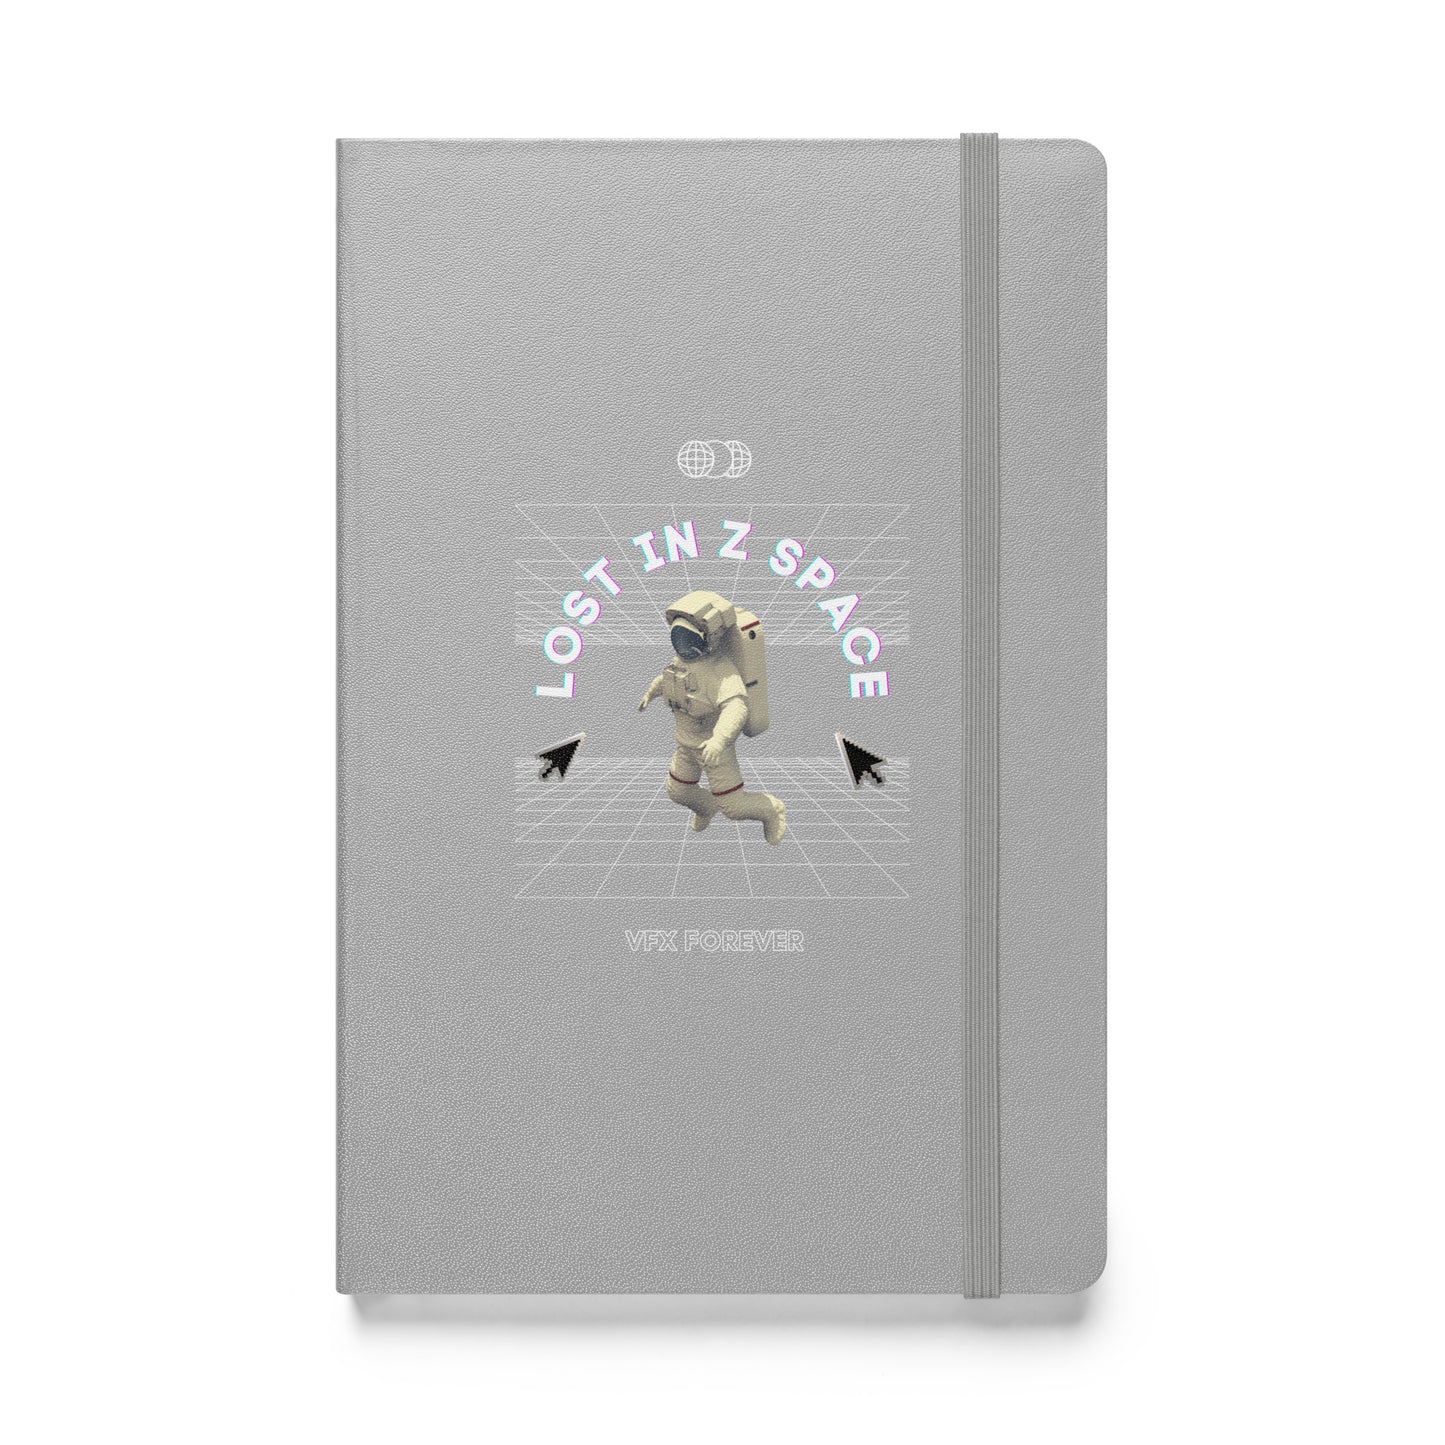 Hardcover Bound Notebook Lost In Z Space - 03 Series - Multicolor - CineQuips